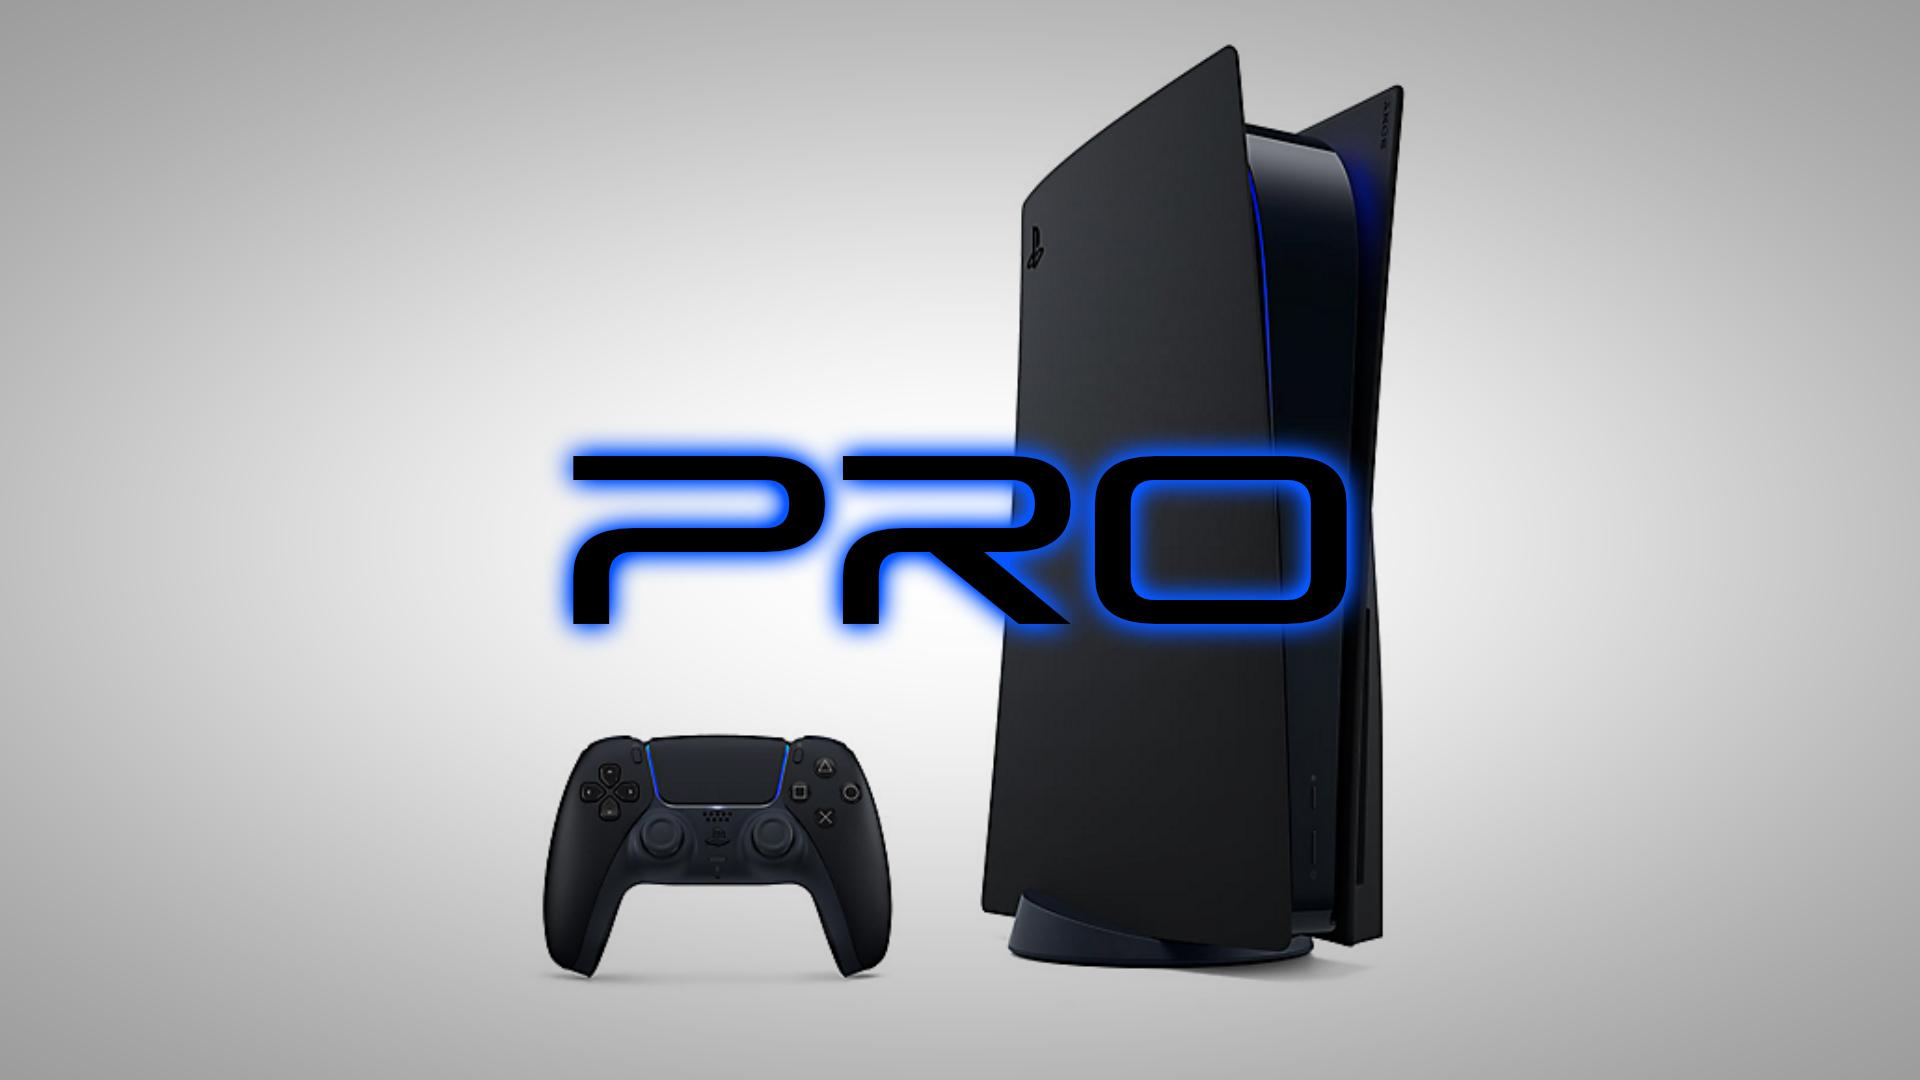 PlayStation 5 Pro rumored to launch alongside regular PS5